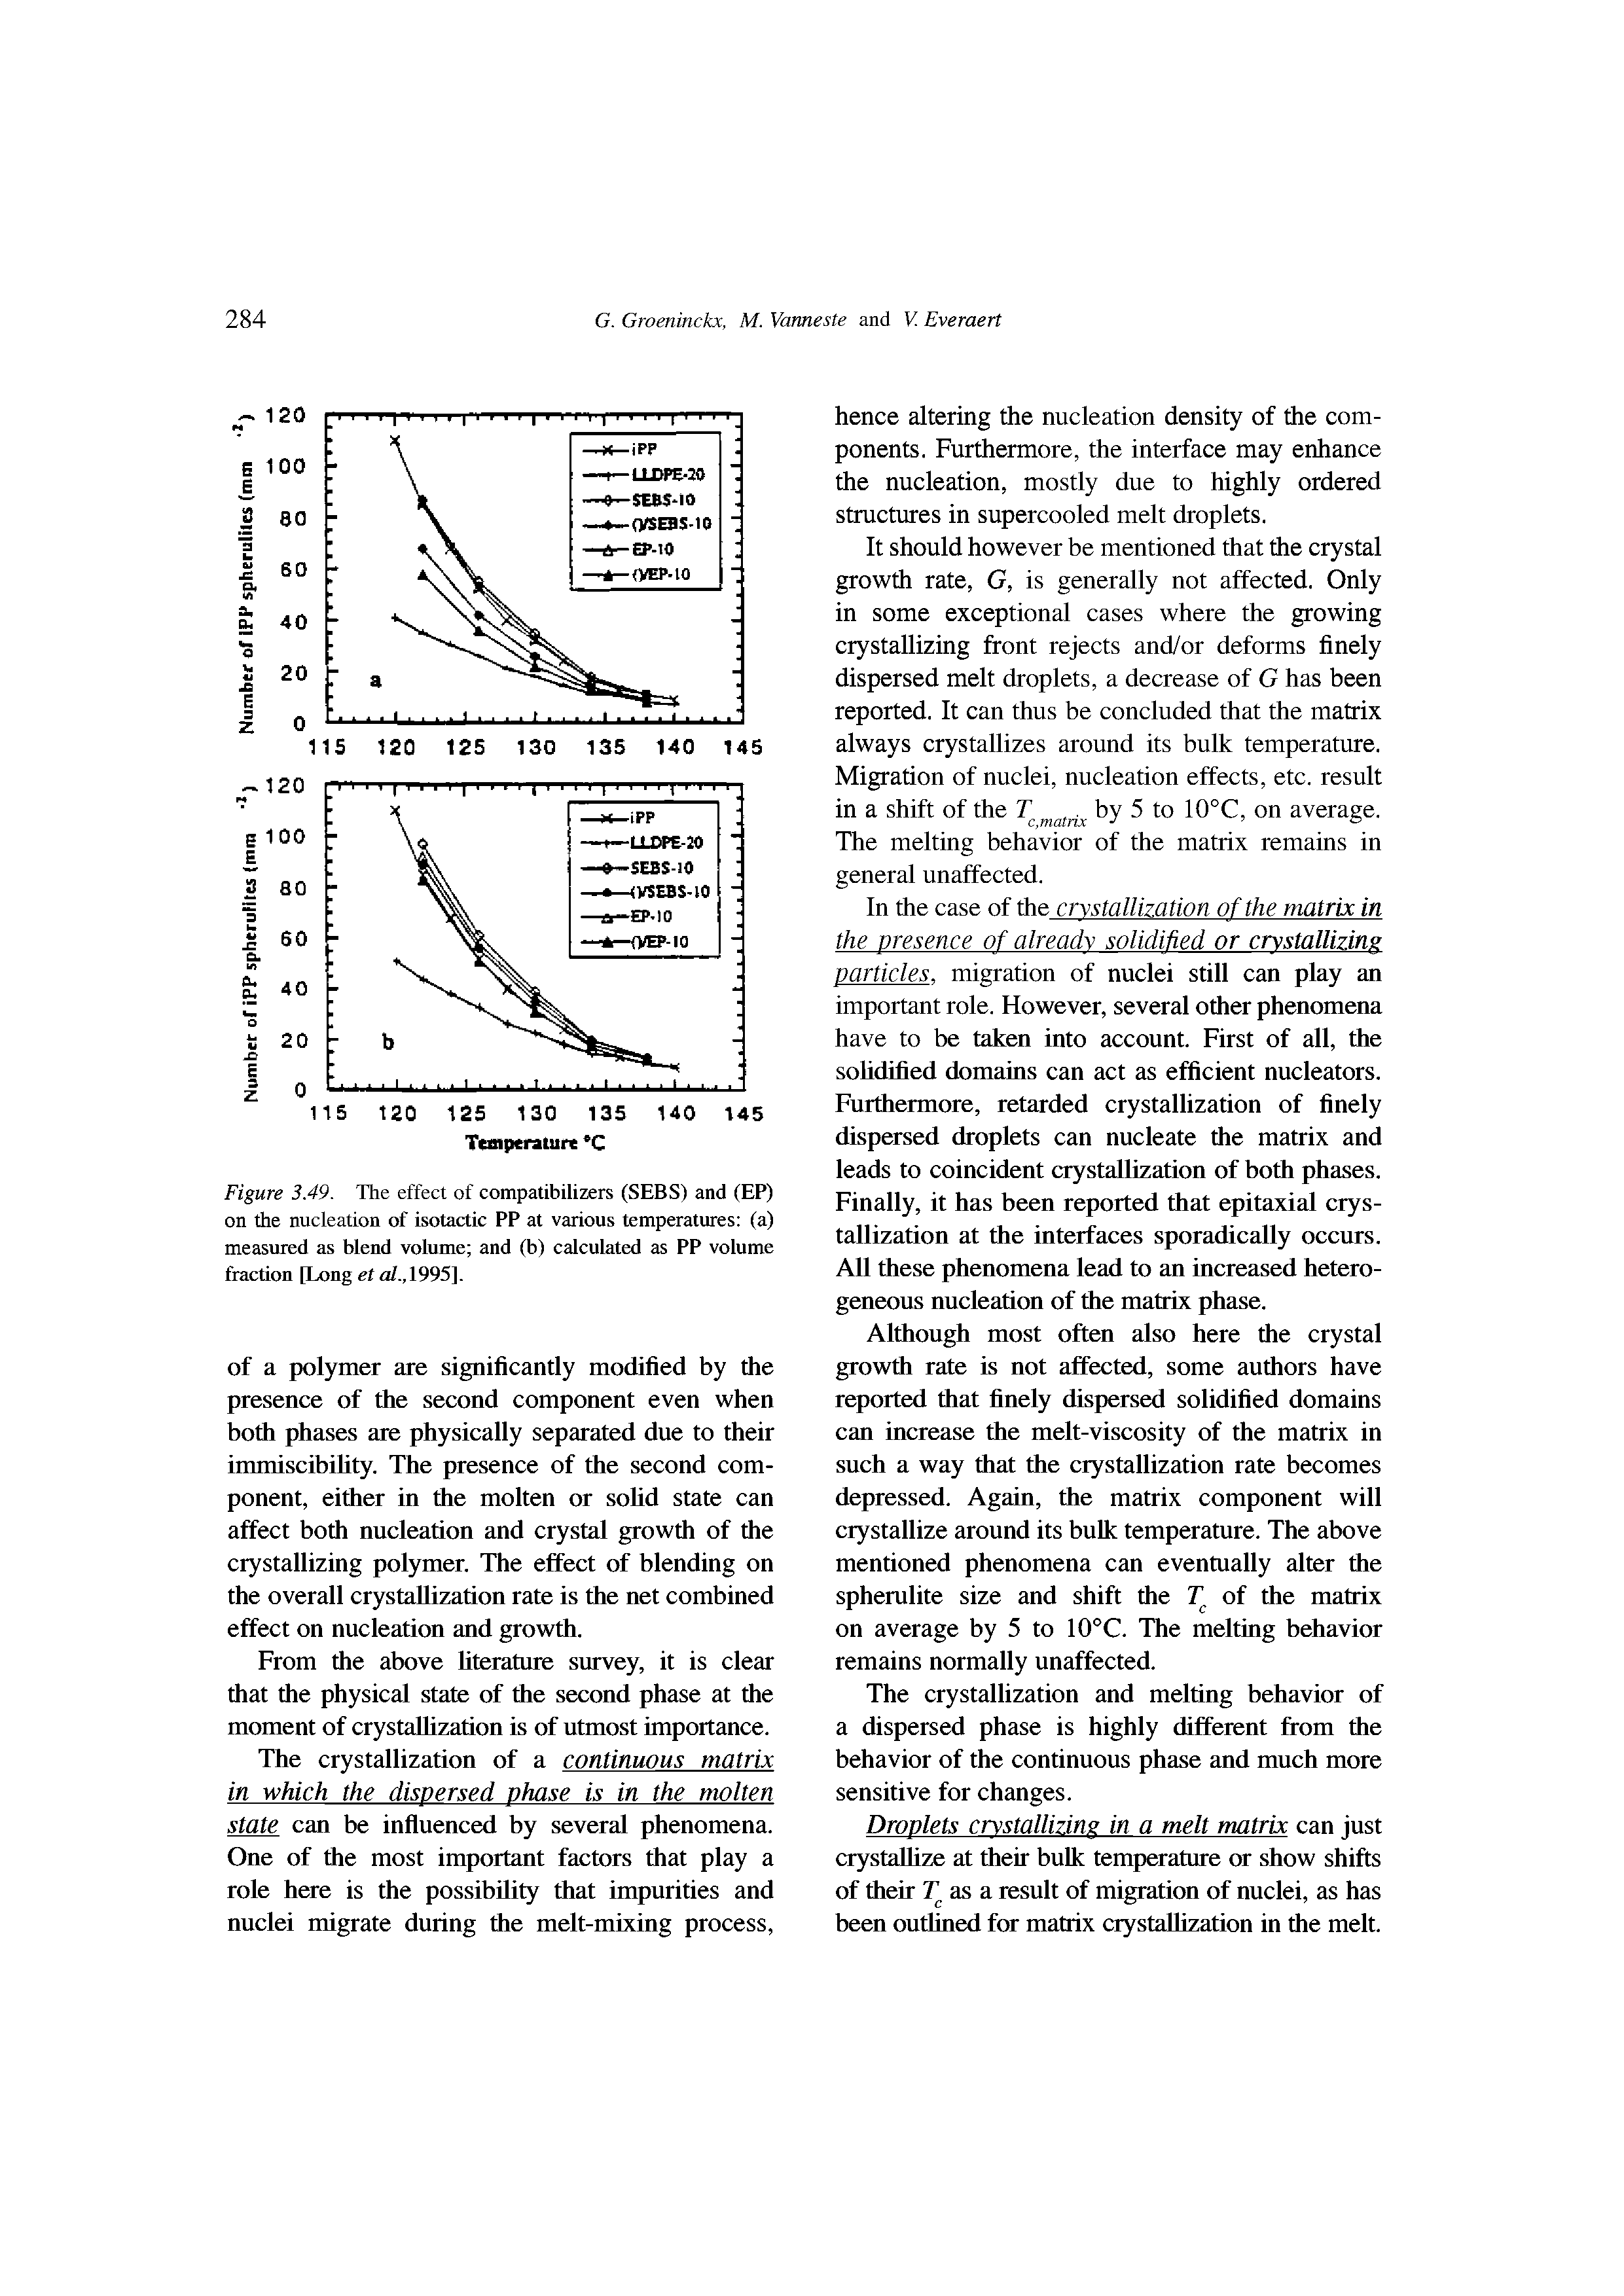 Figure 3.49. The effect of compatibilizers (SEES) and (EP) on the nucleation of isotactic PP at various temperatures (a) measured as blend volume and (b) calculated as PP volume fraction Px>ng et al.,1995].